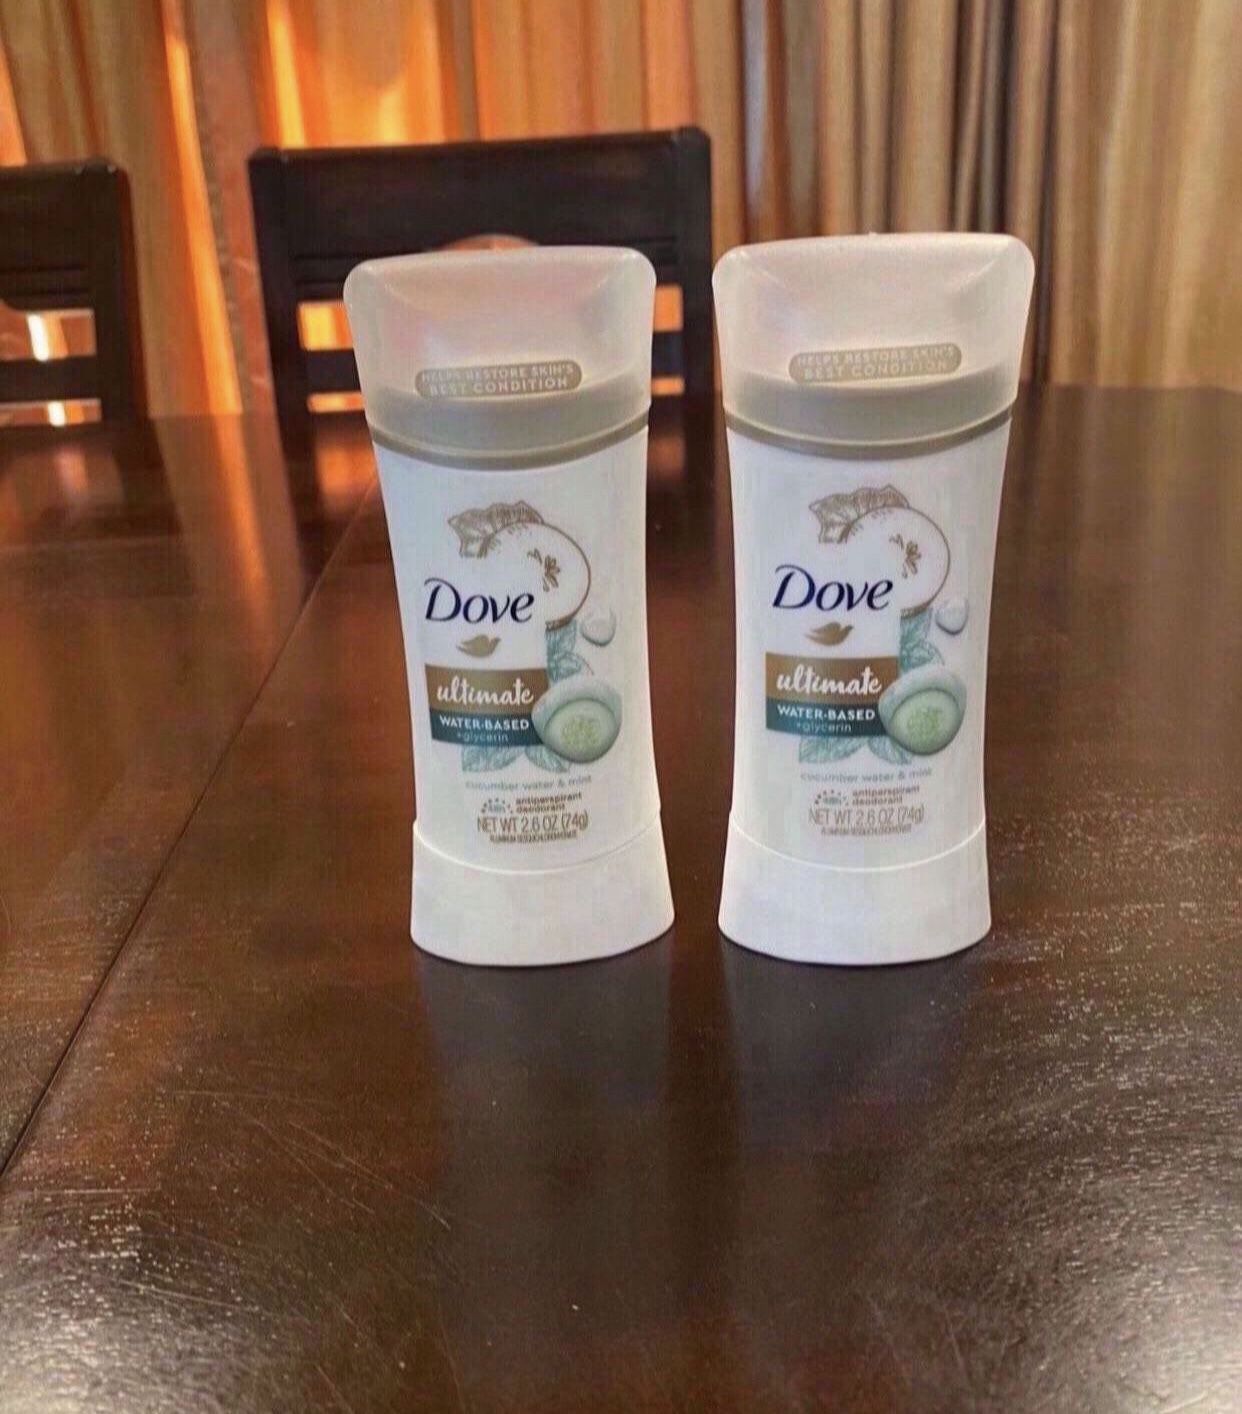 Dove Ultimate Deodorant $10 Firm For Both